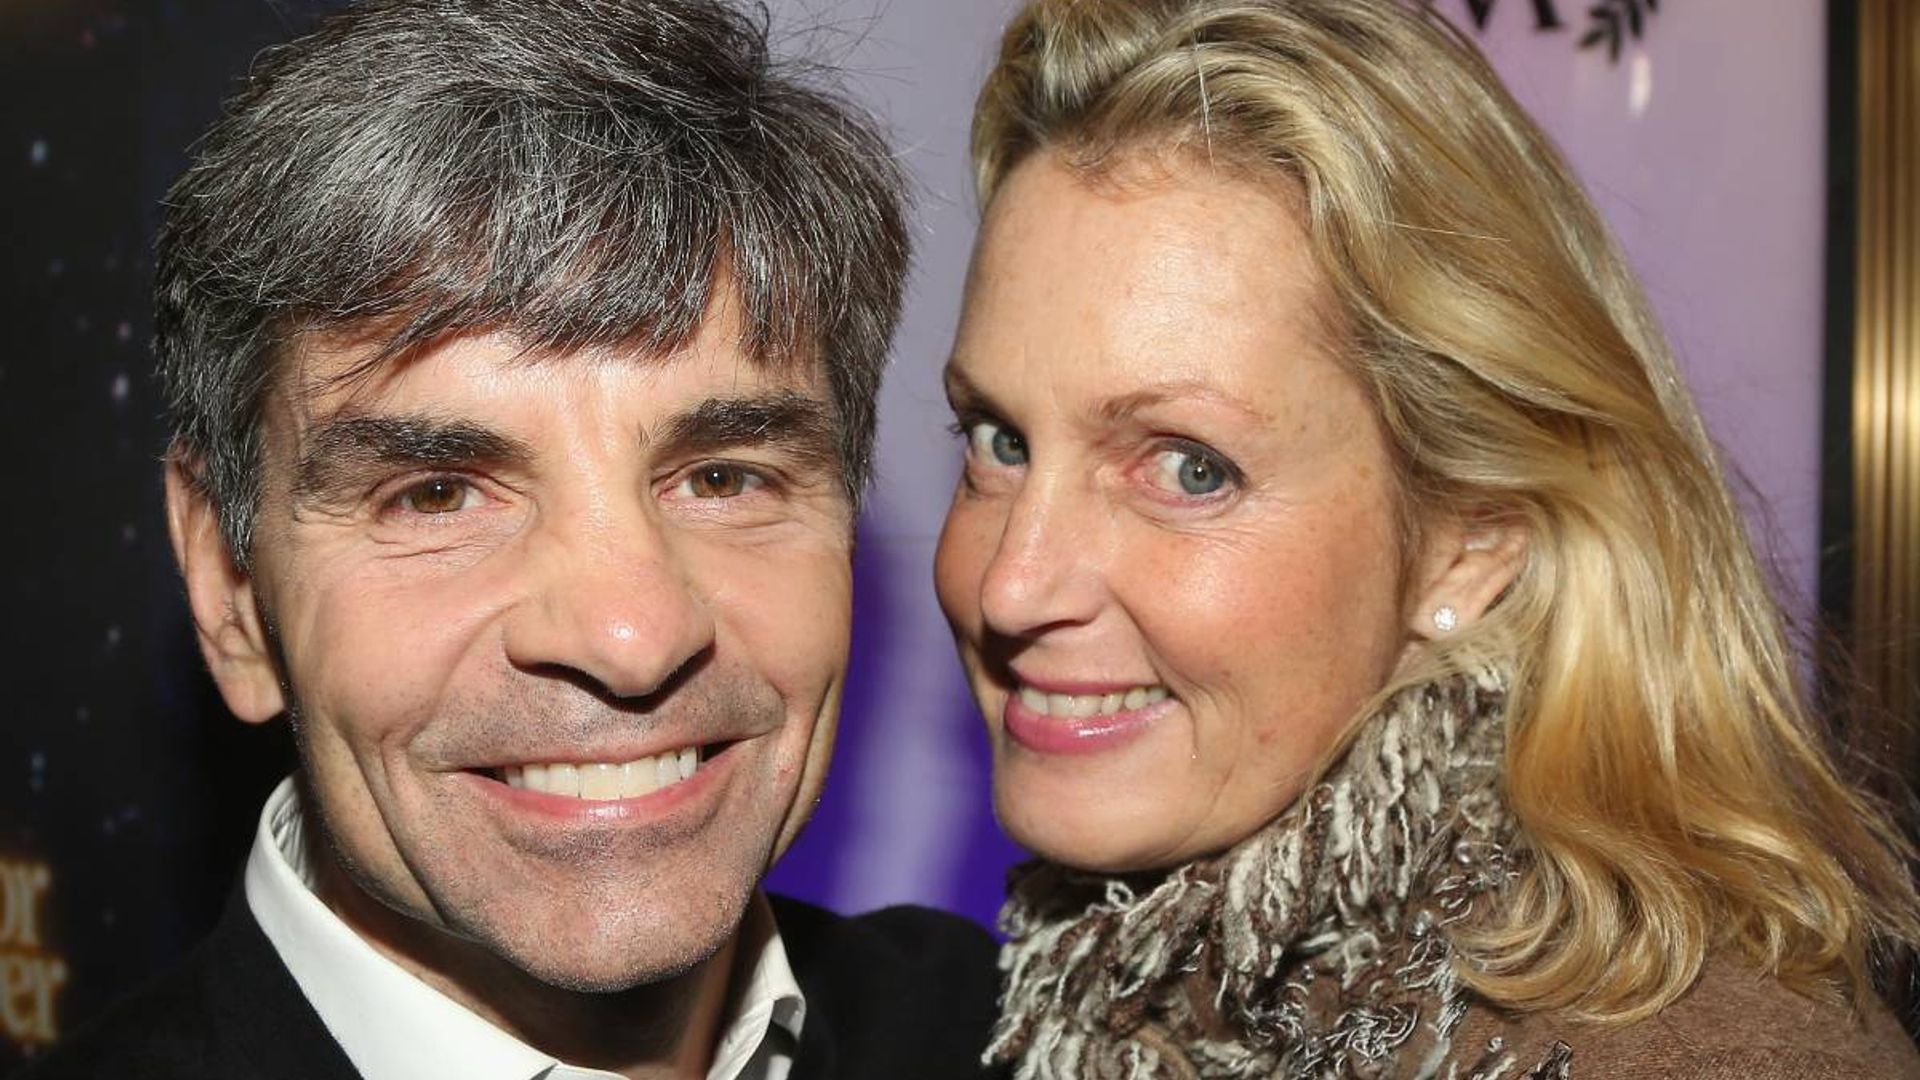 gma-george-stephanopoulos-unique-relationship-ali-wentworth